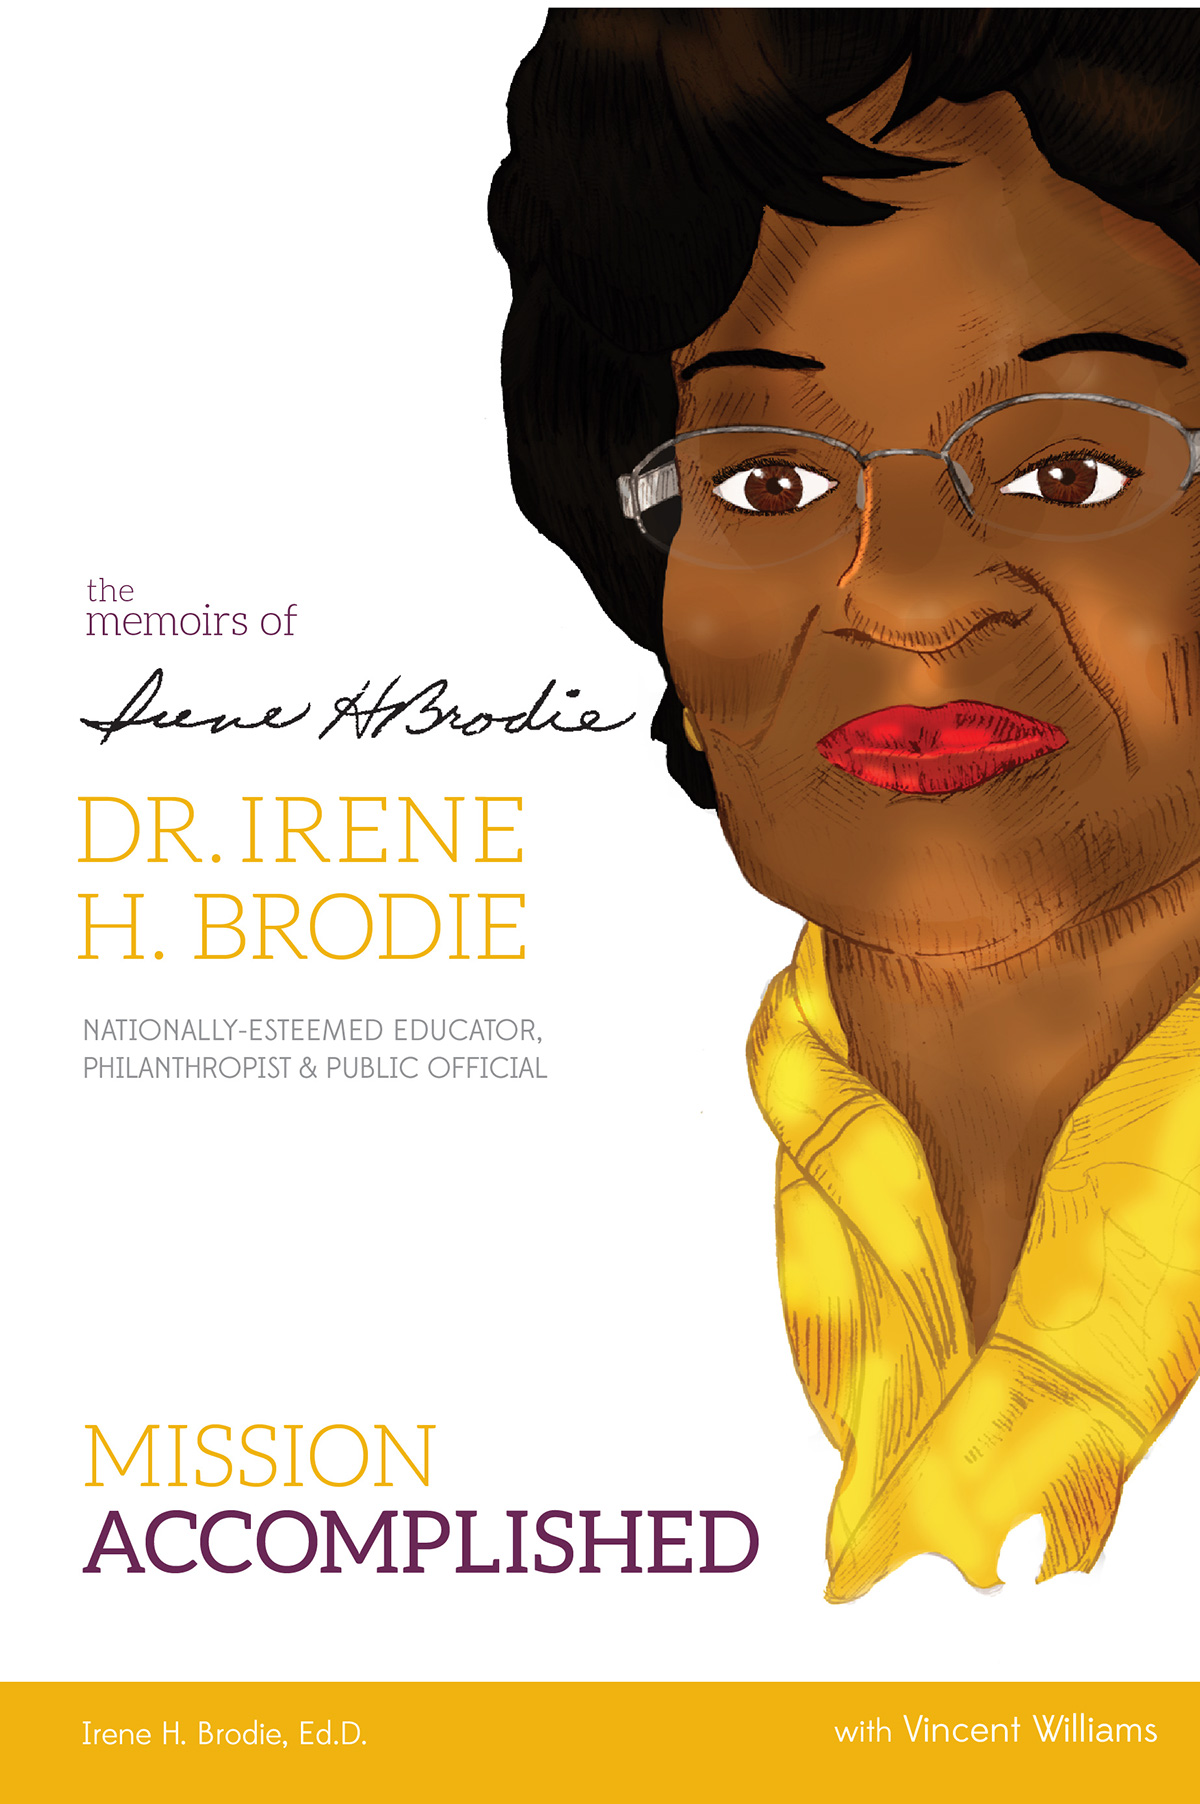 book cover book cover political politics political figure doctor Dr. Irene H. brodie Dr. Brodie Irene Brodie Irene H. Brodie chicago mayor